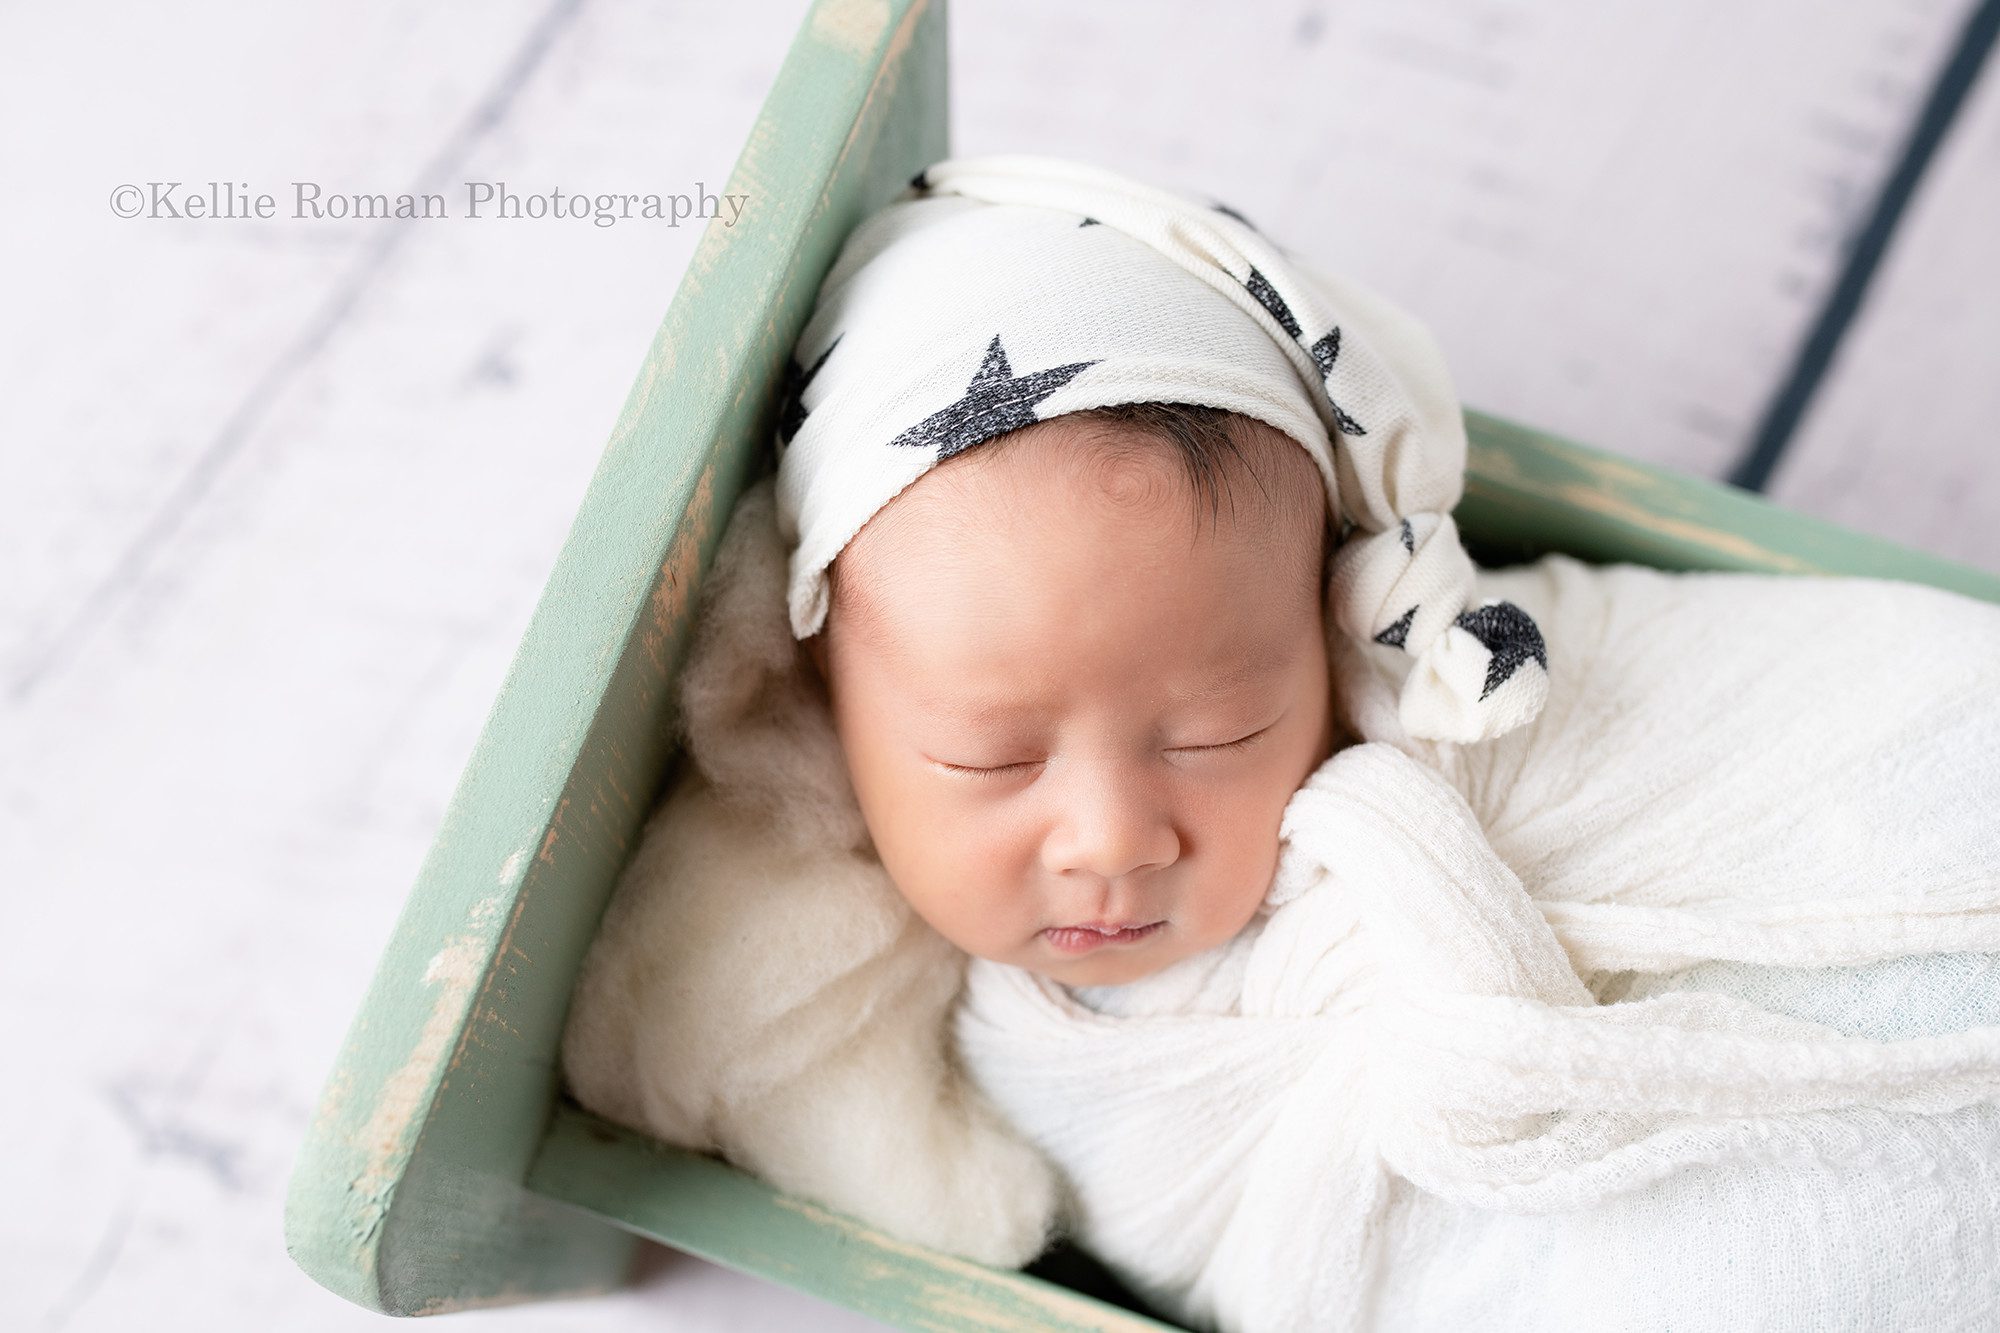 bright airy newborn session a newborn baby boy in a milwaukee photography studio located in greendale Wisconsin. The baby boy has a white swaddle wrap around him and a white hat with black stars on. He is resting on his back asleep on white fluff in a teal bed.